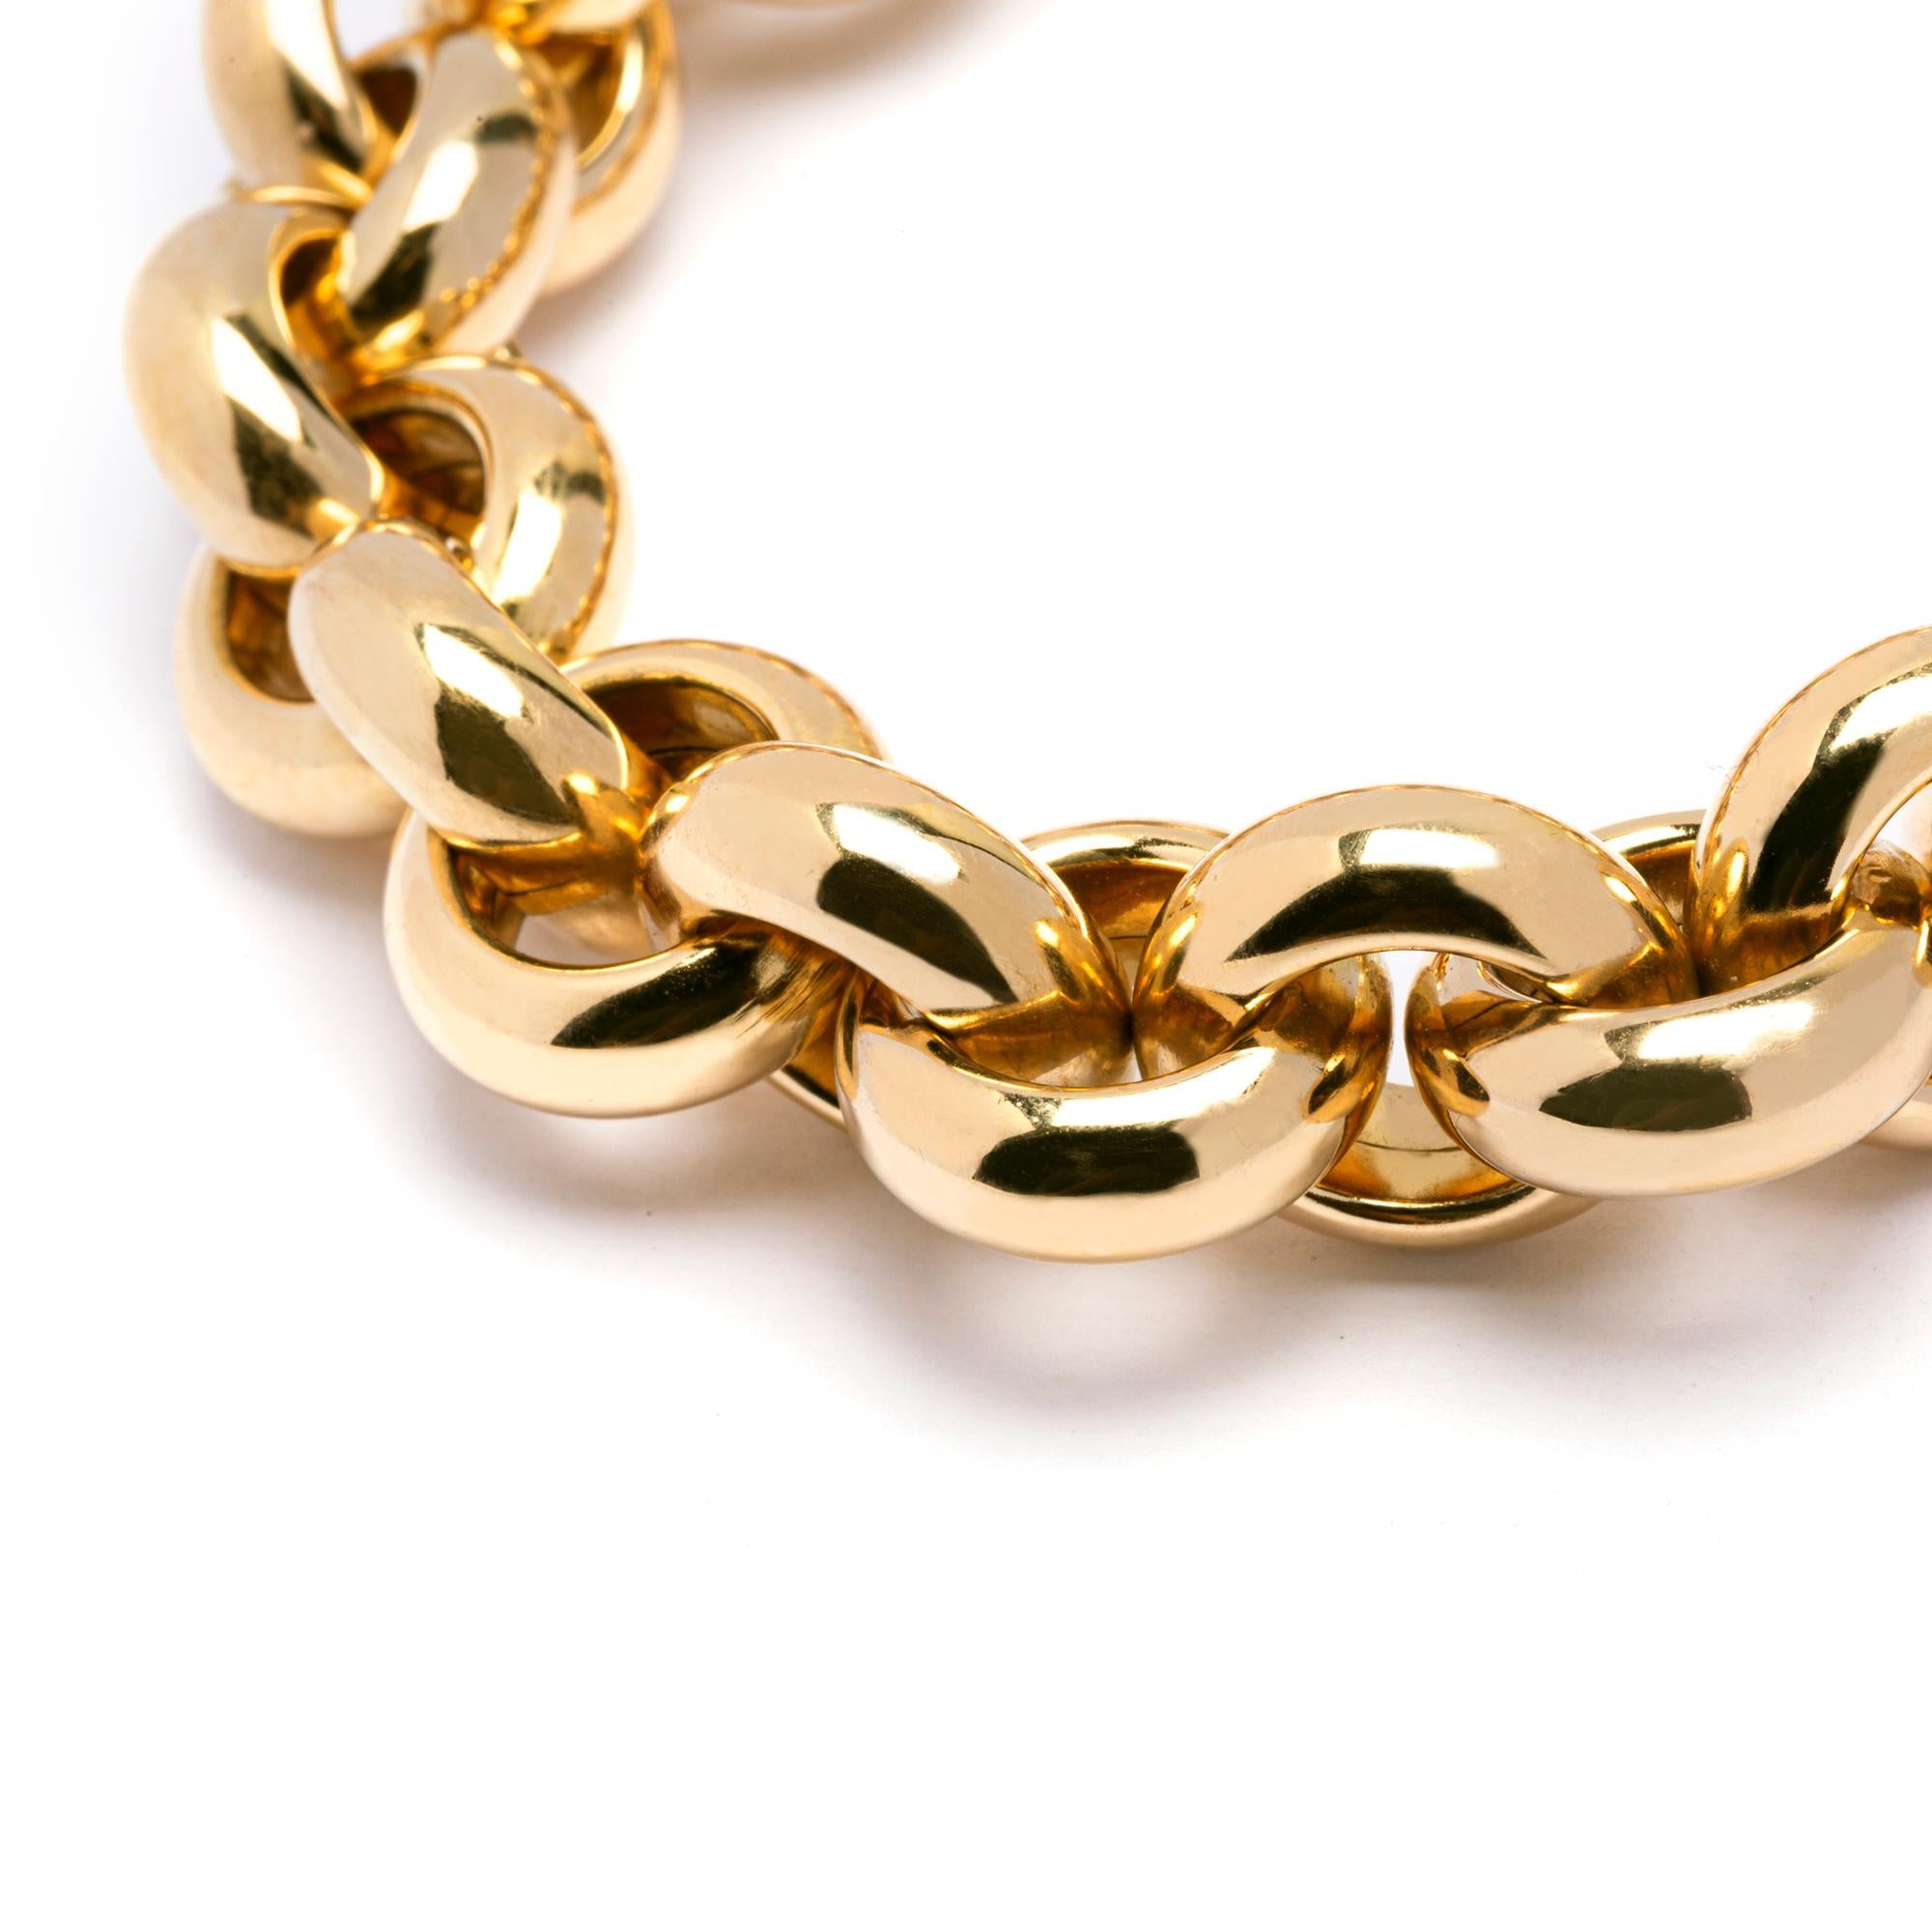 Alex Jona design collection, hand crafted in Italy, 18 Karat yellow gold link chain bracelet. 
Dimensions : L x 20 mm, W x 14 mm - L x 0.78 in, W x 0.55 in. 63 Grams.

Alex Jona jewels stand out, not only for their special design and for the